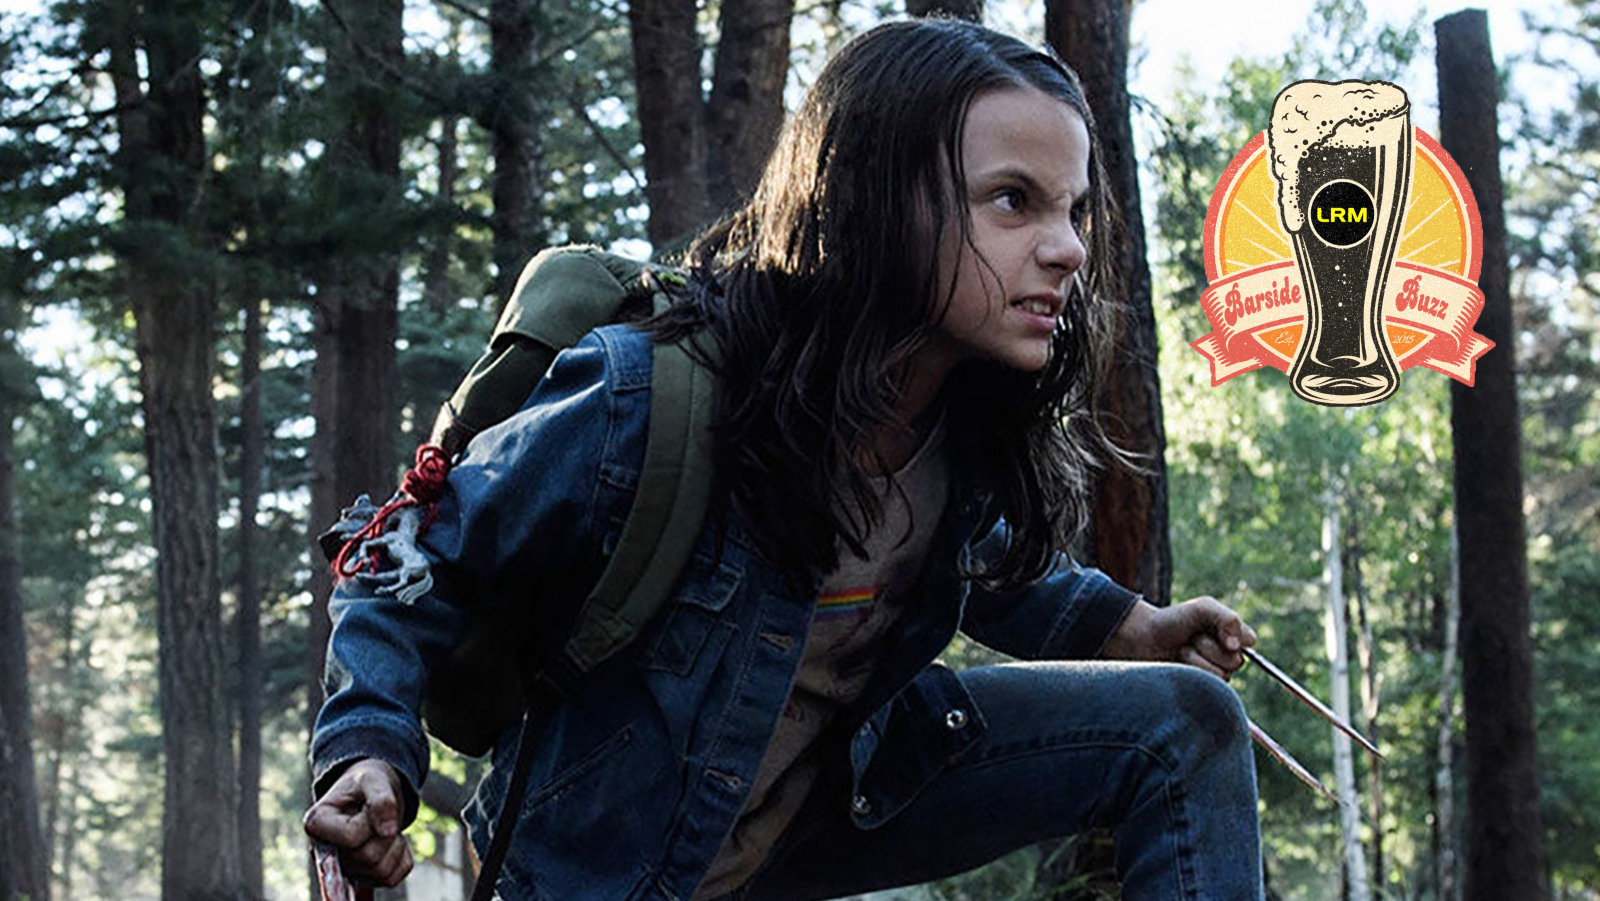 According to the latest Marvel Barside Buzz Dafne Keen set to reprise role as X23 in Deadpool 3 plus the Nova series becomes a movie.